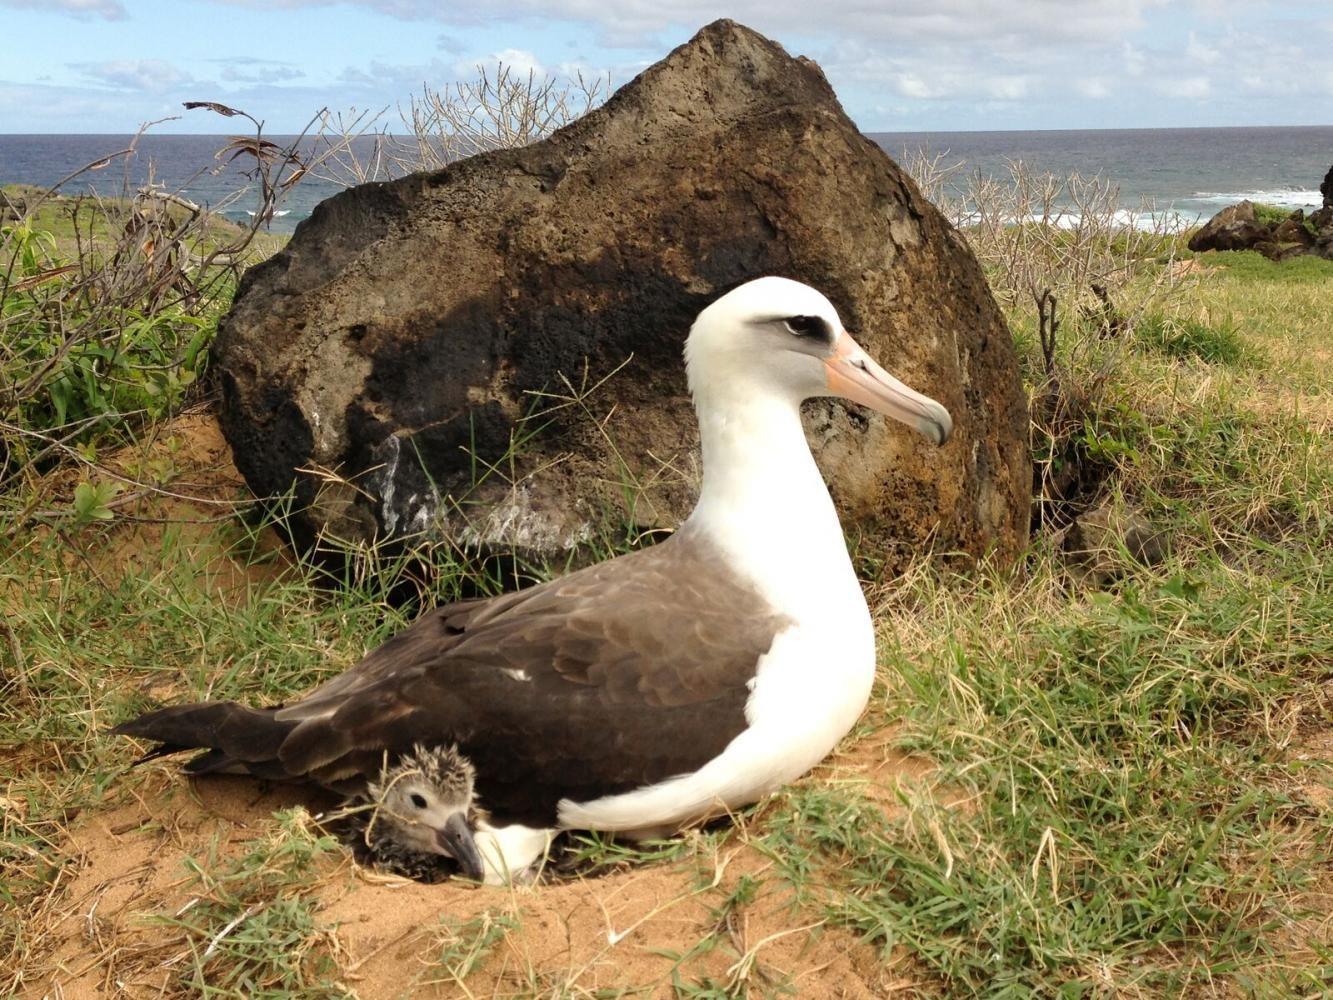 The+Laysan+albatross%2C+a+federally+protected+species%2C+with+its+chick+at+the+Kaena+Point+Natural+Area+Reserve+in+Hawaii.+